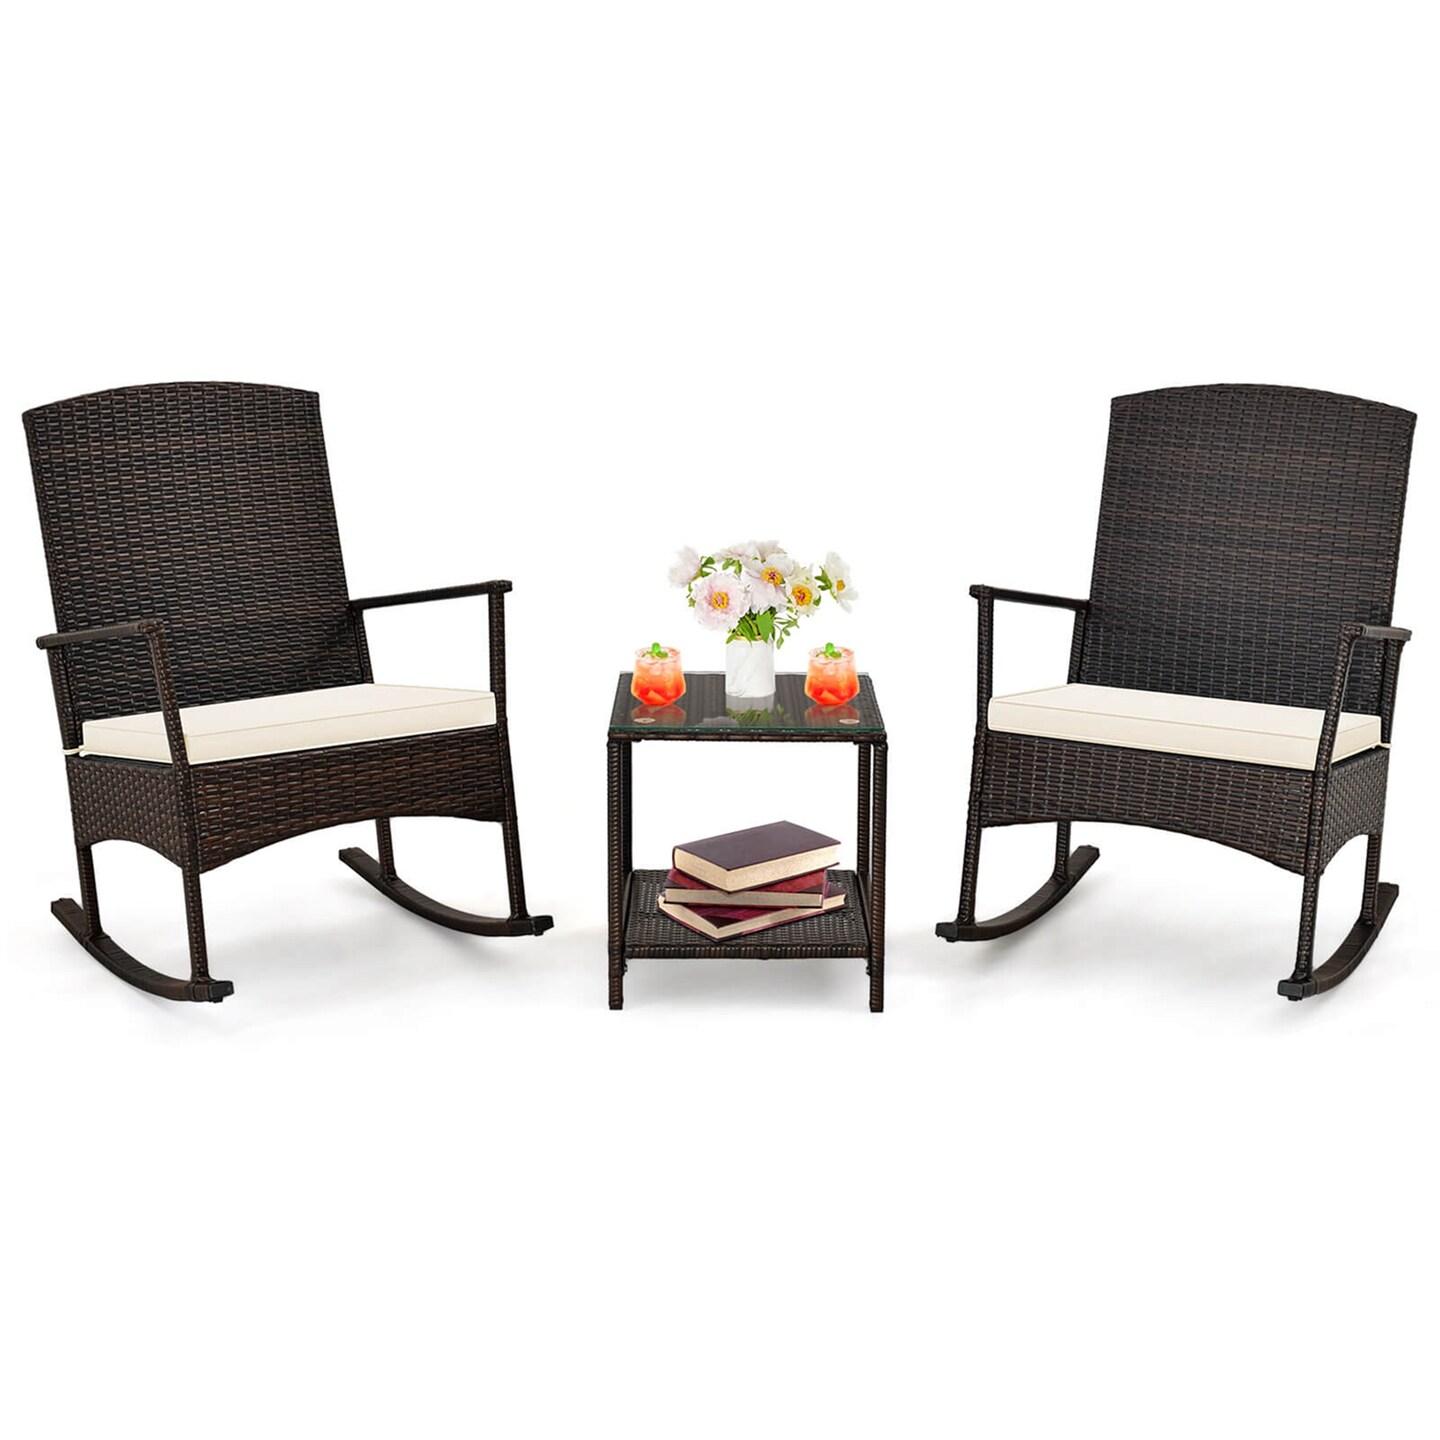 Costway 3 Piece Patio Rocking Set Wicker Rocking Chairs with 2-Tier Coffee Table Turquoise/Off White